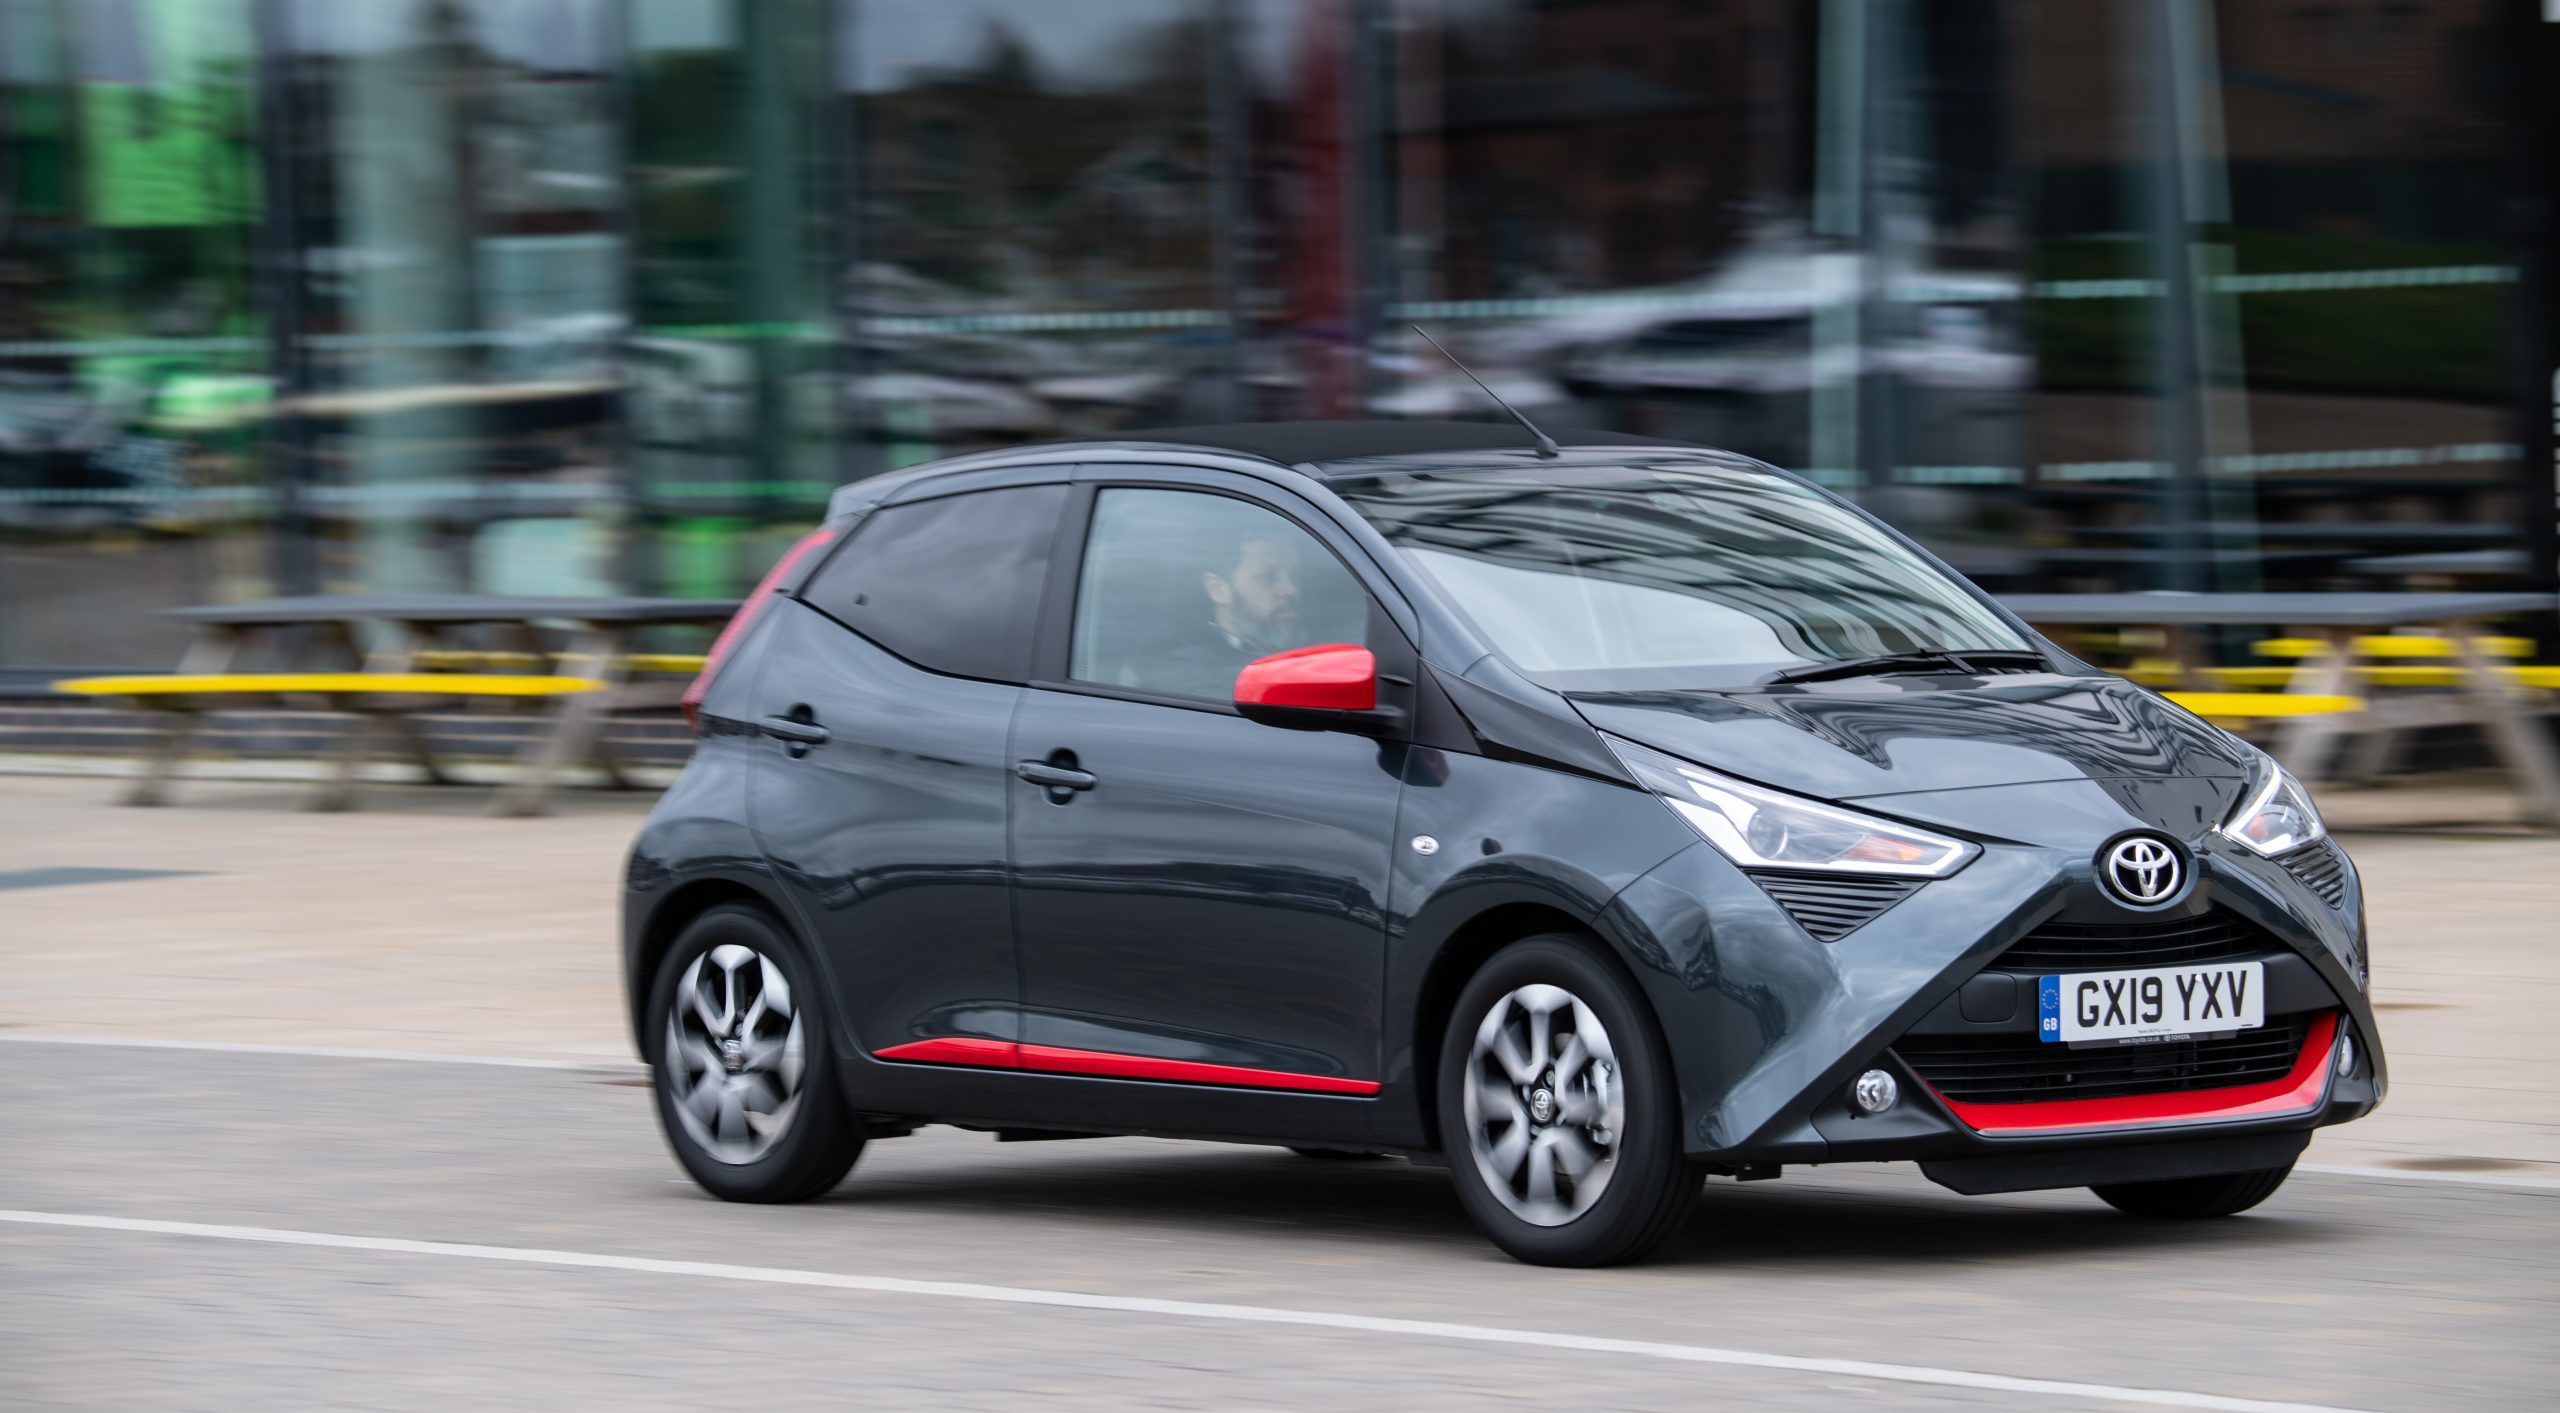 05-The-Most-Reliable-Cars-Revealed-Toyota Aygo